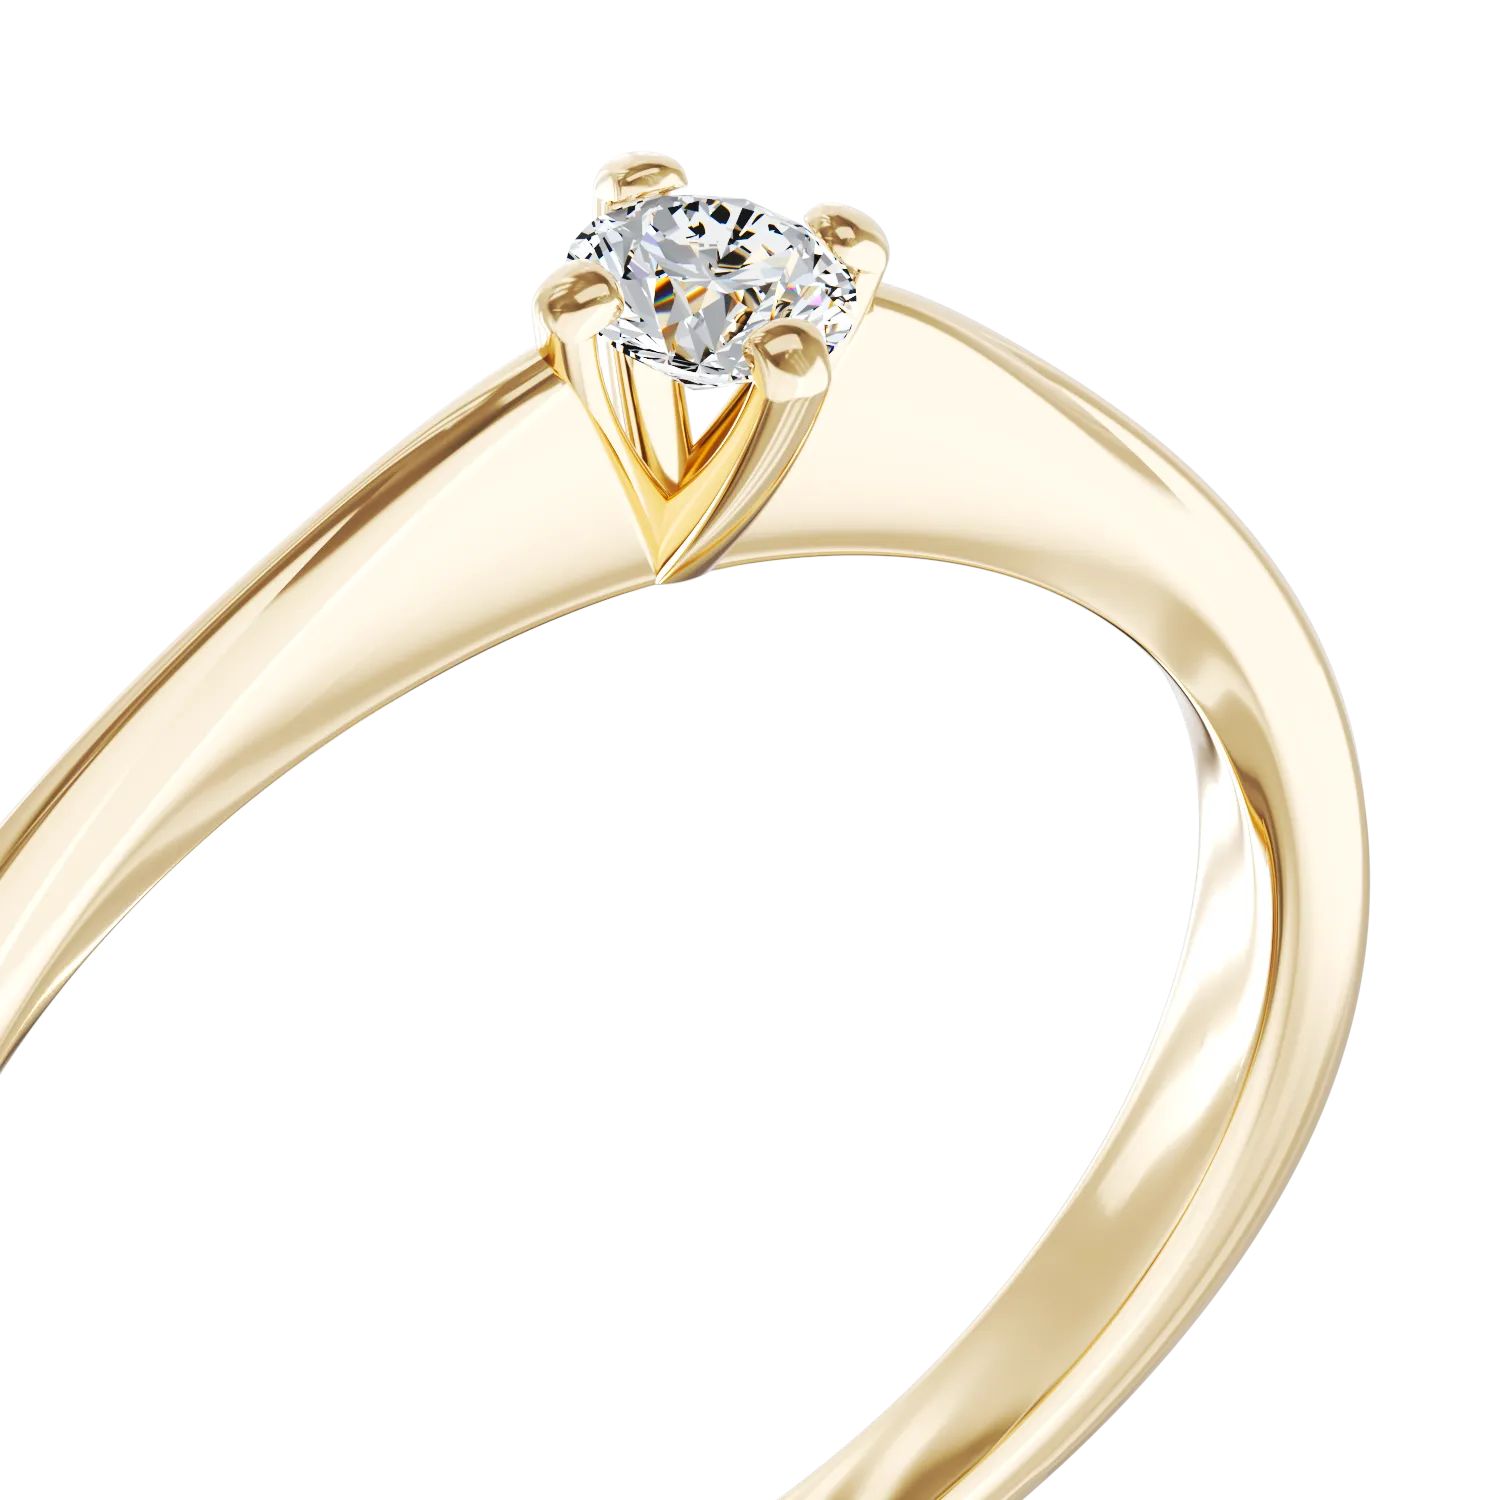 18K yellow gold engagement ring with a 0.11ct solitaire diamond